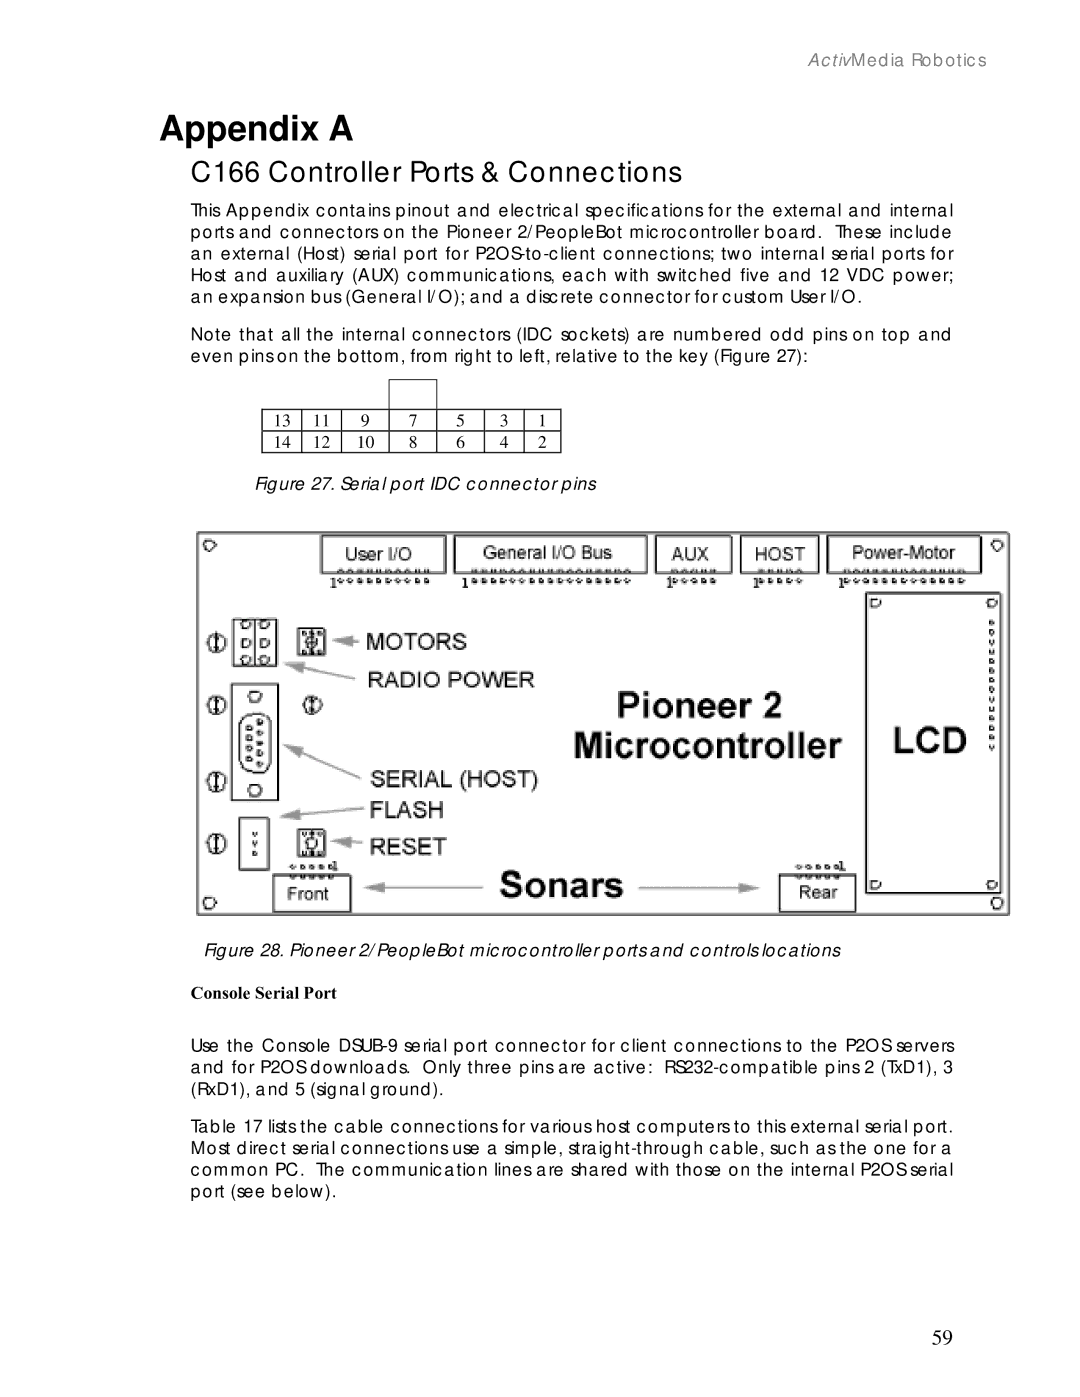 Pioneer 2 / PeopleBot manual Appendix a, C166 Controller Ports & Connections 